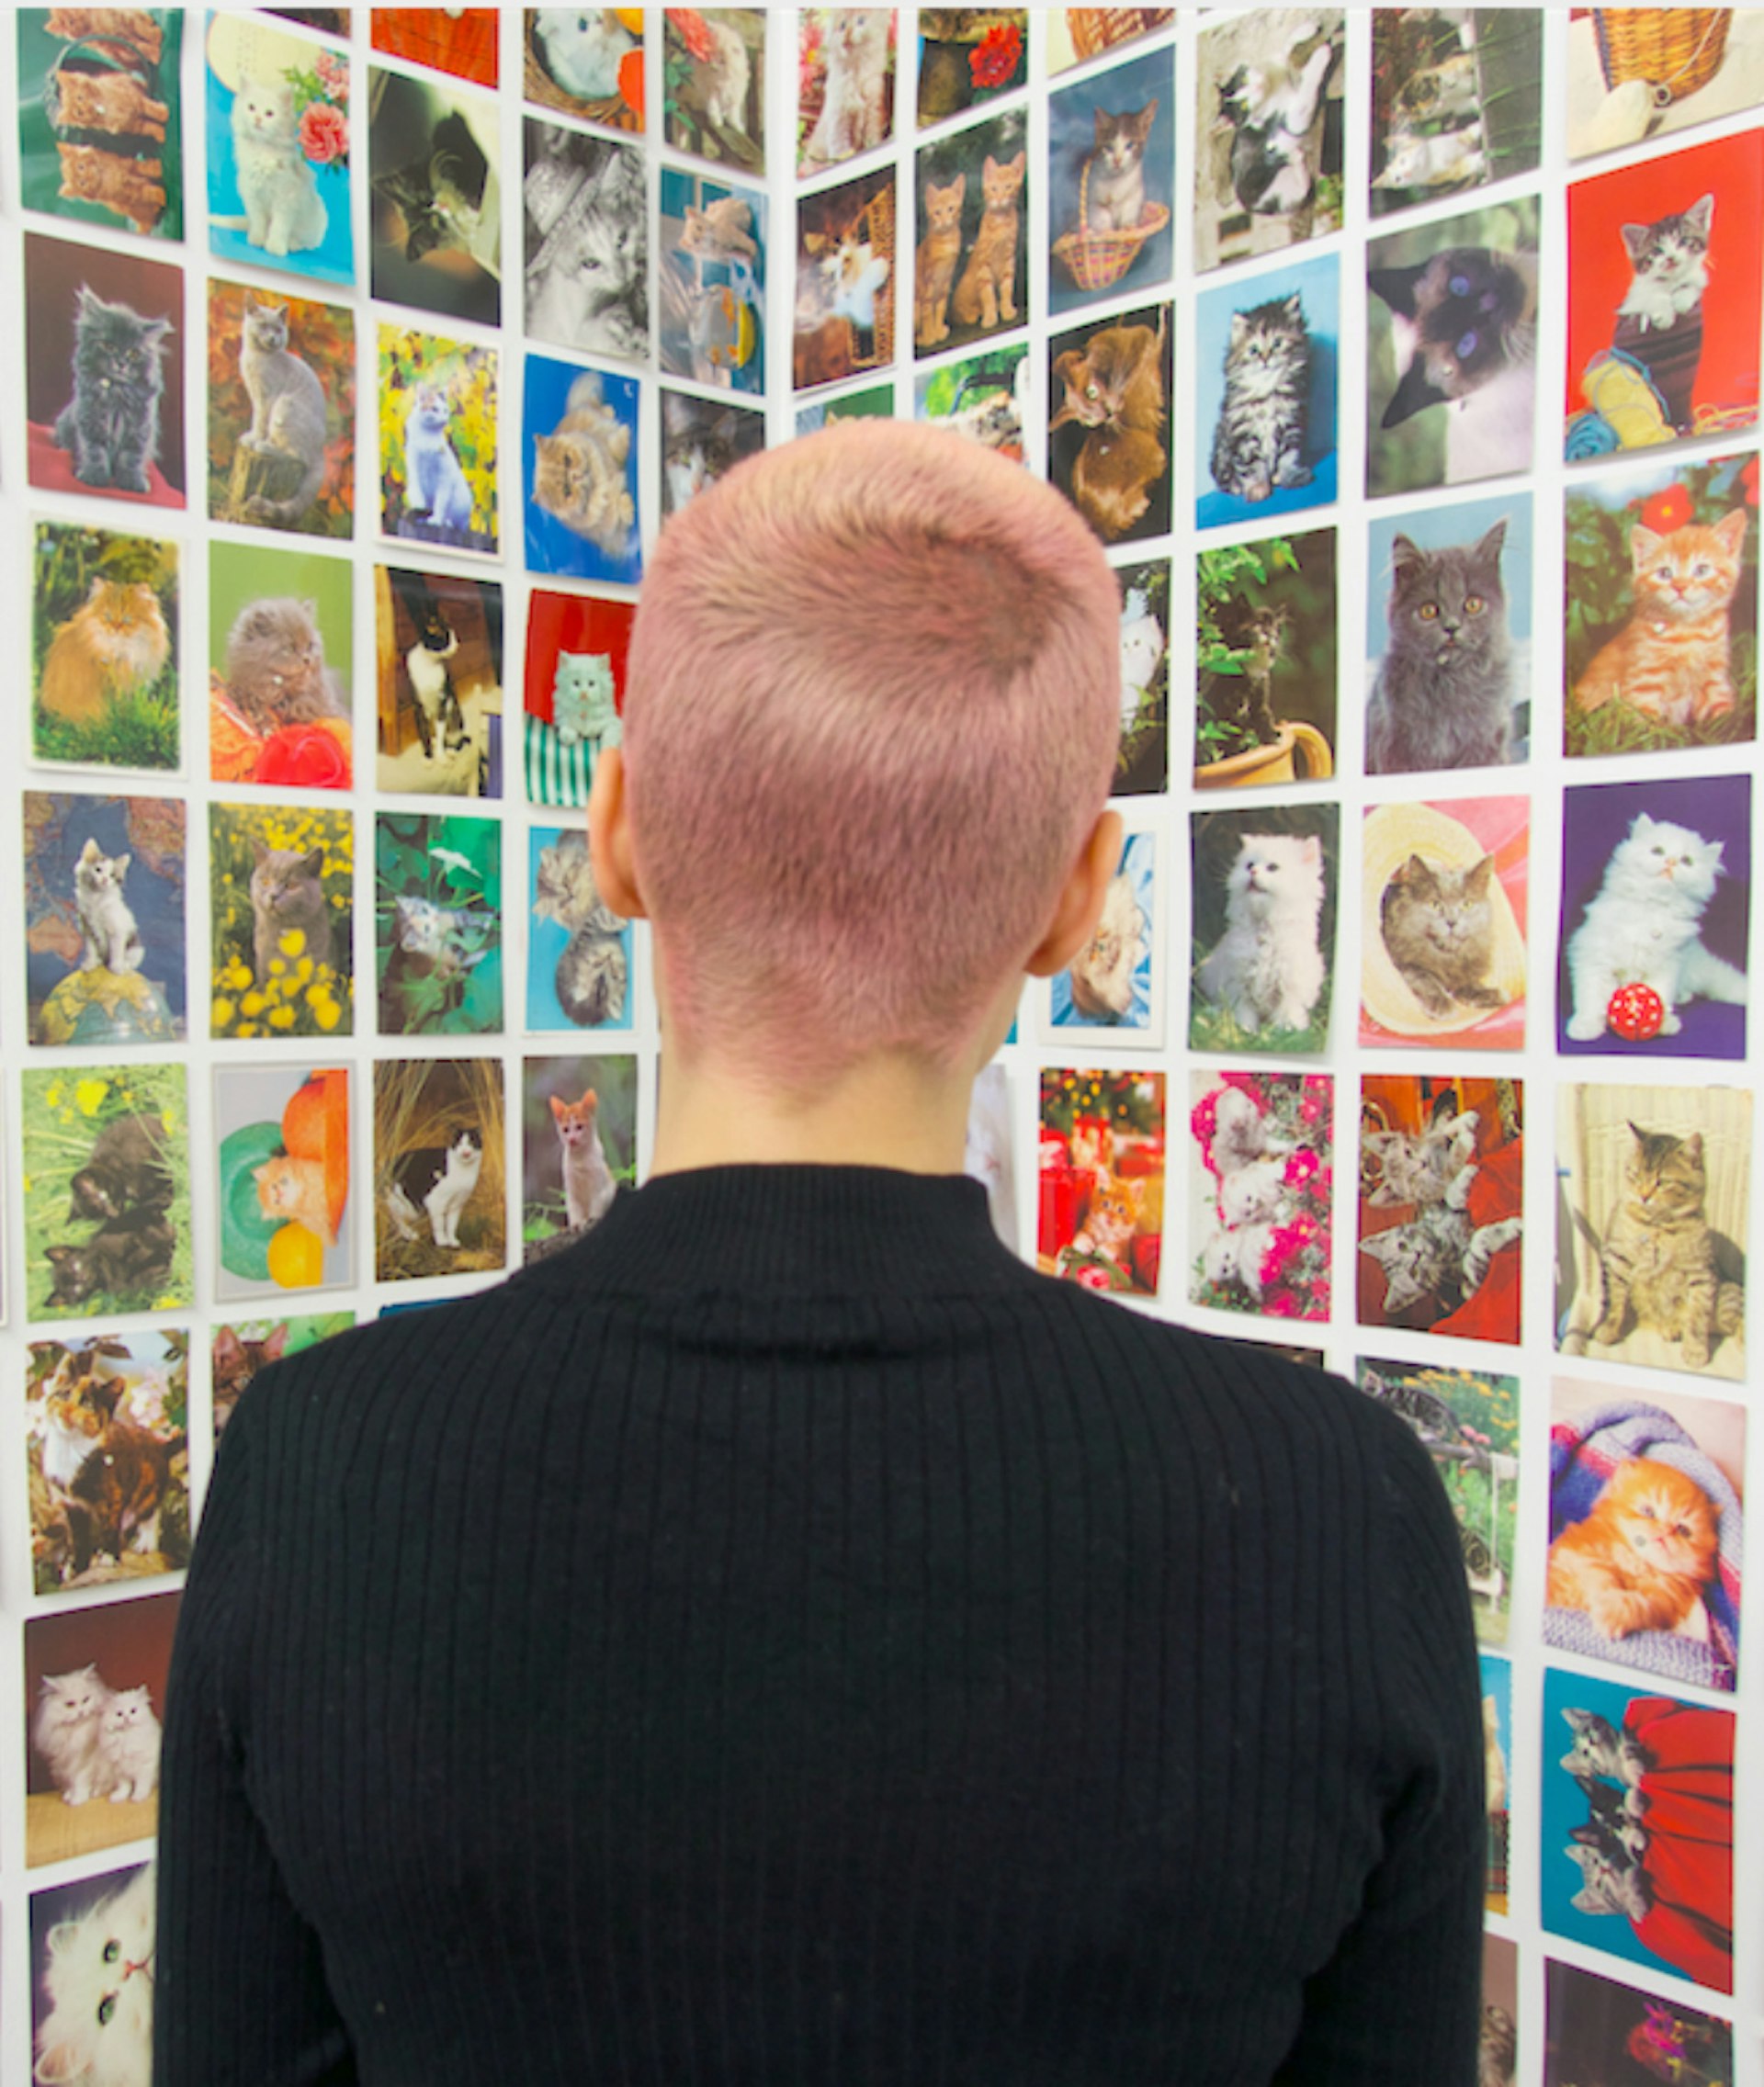 A girl with pink hair takes in an art display depicting cats